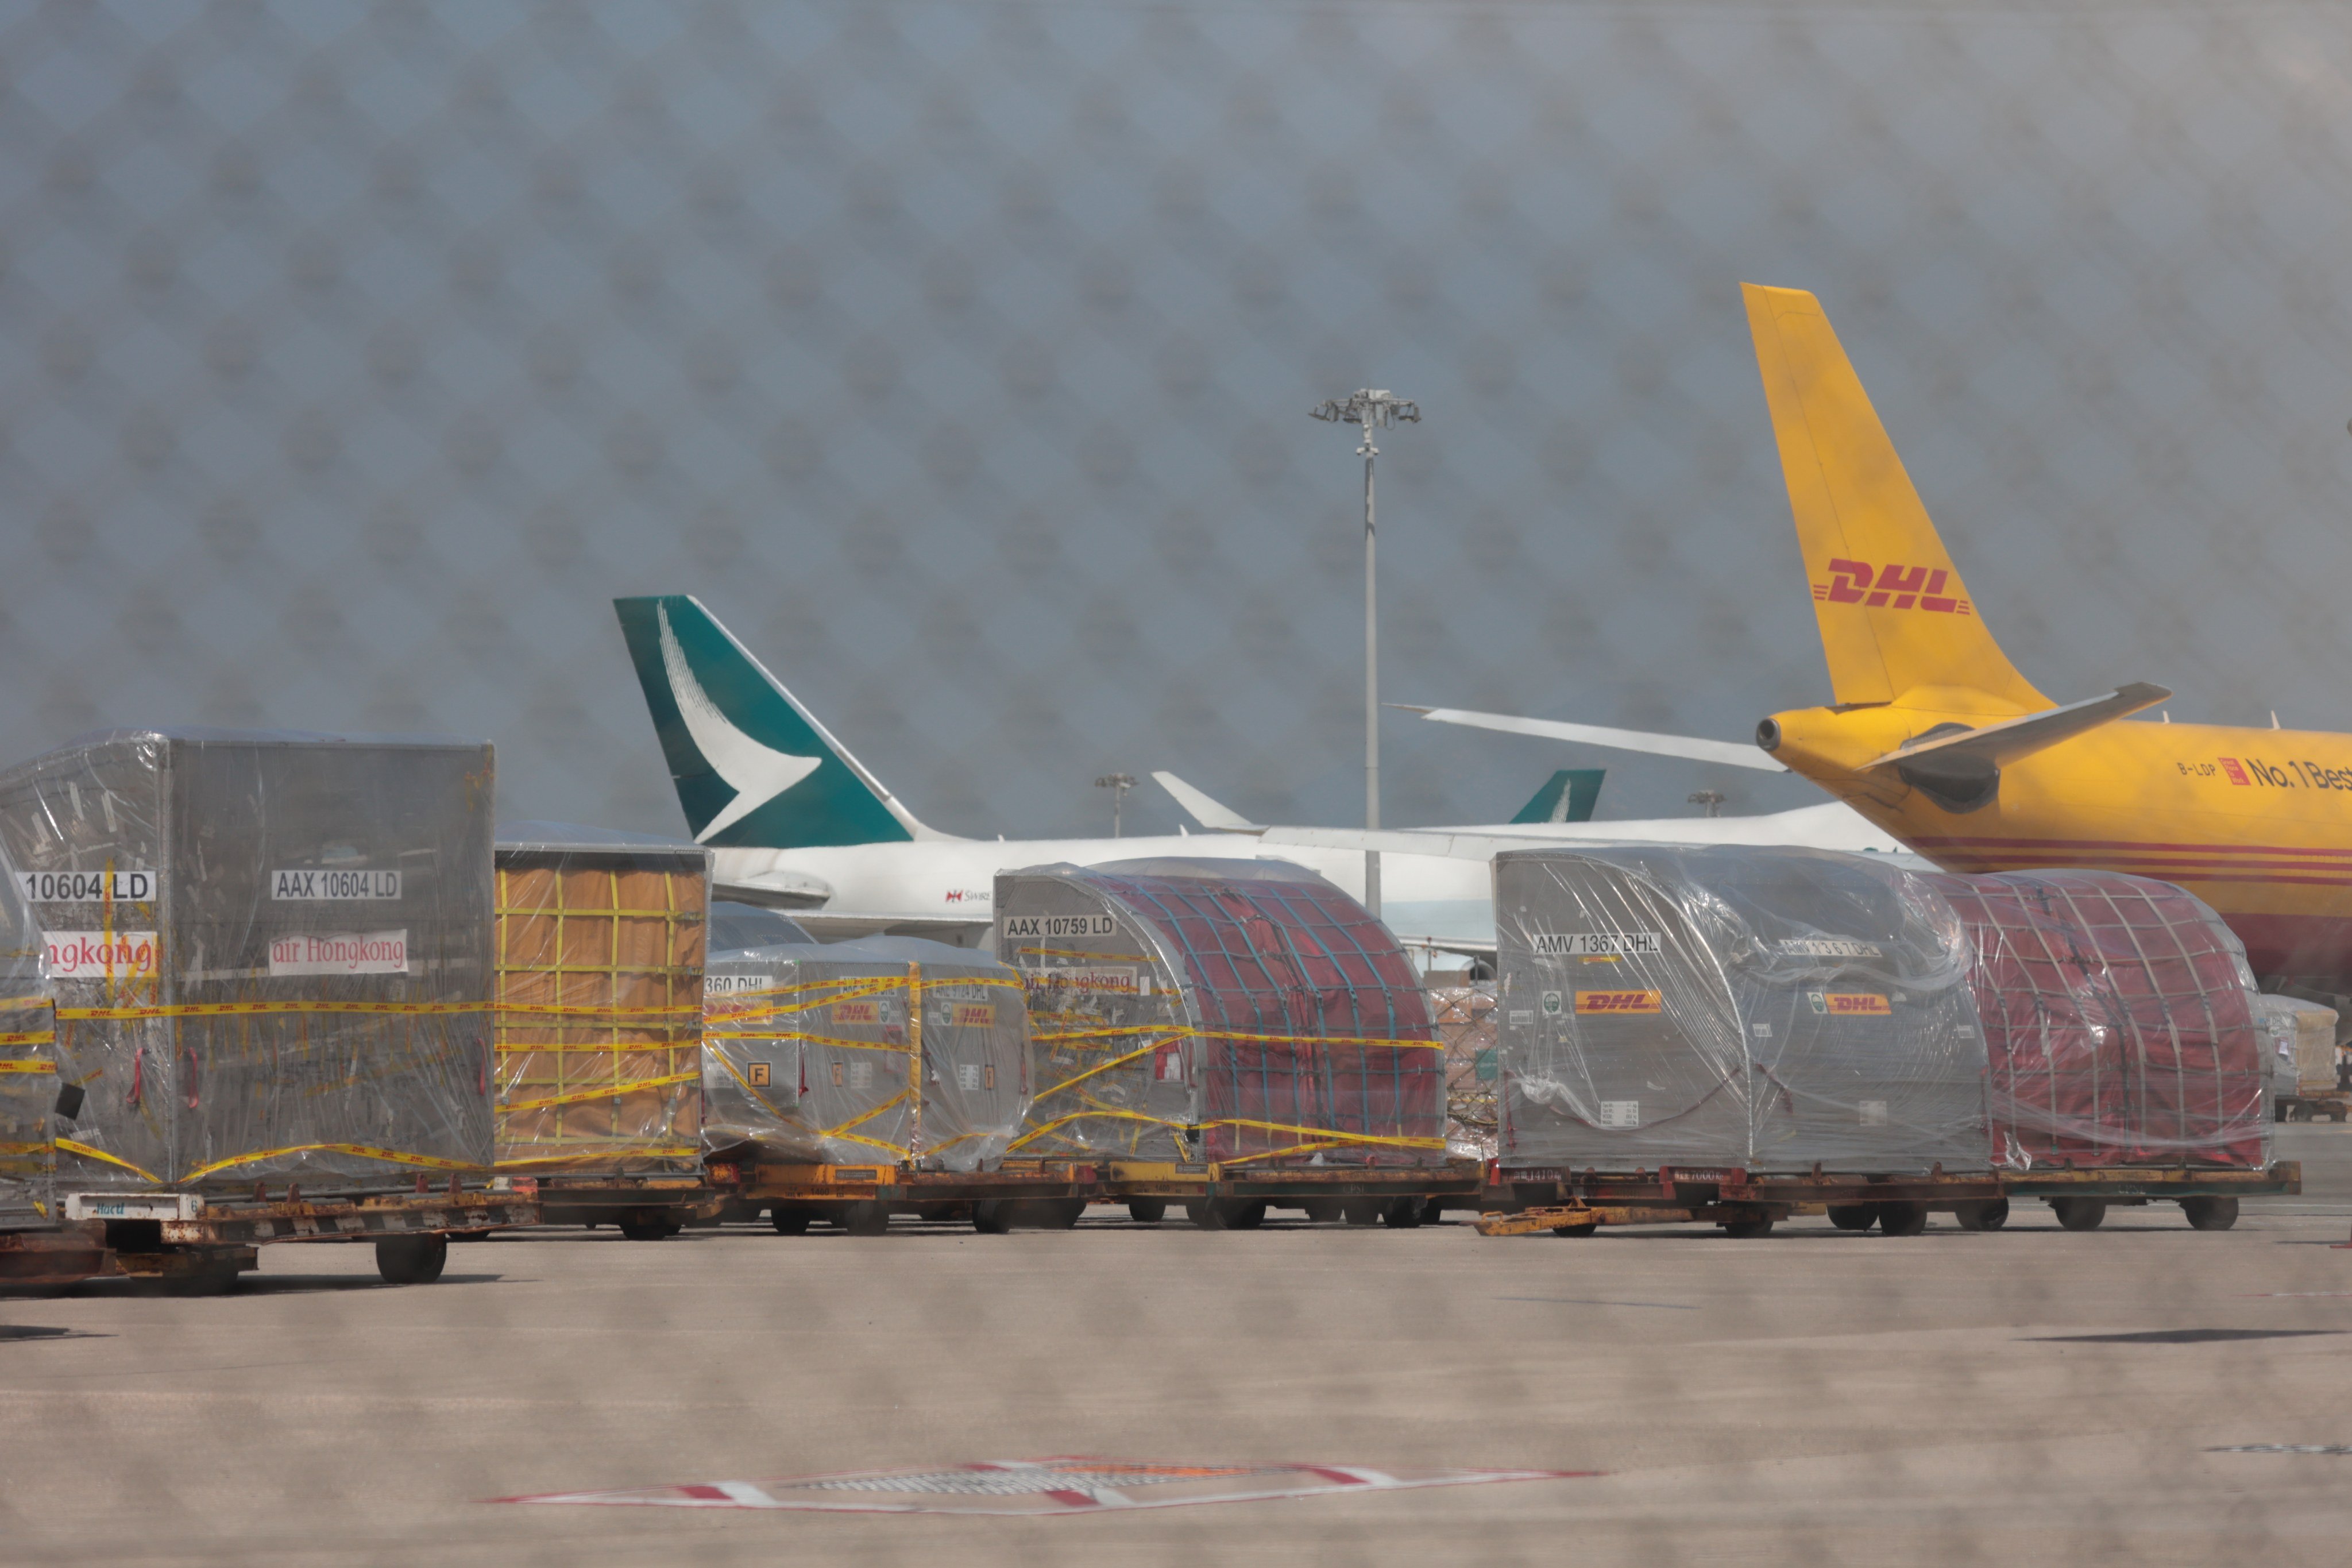 Hong Kong International Airport registered a 3.3 per cent increase in cargo volume to 4.3 million tonnes, according to provisional figures from Airports Council International. Photo: Sam Tsang